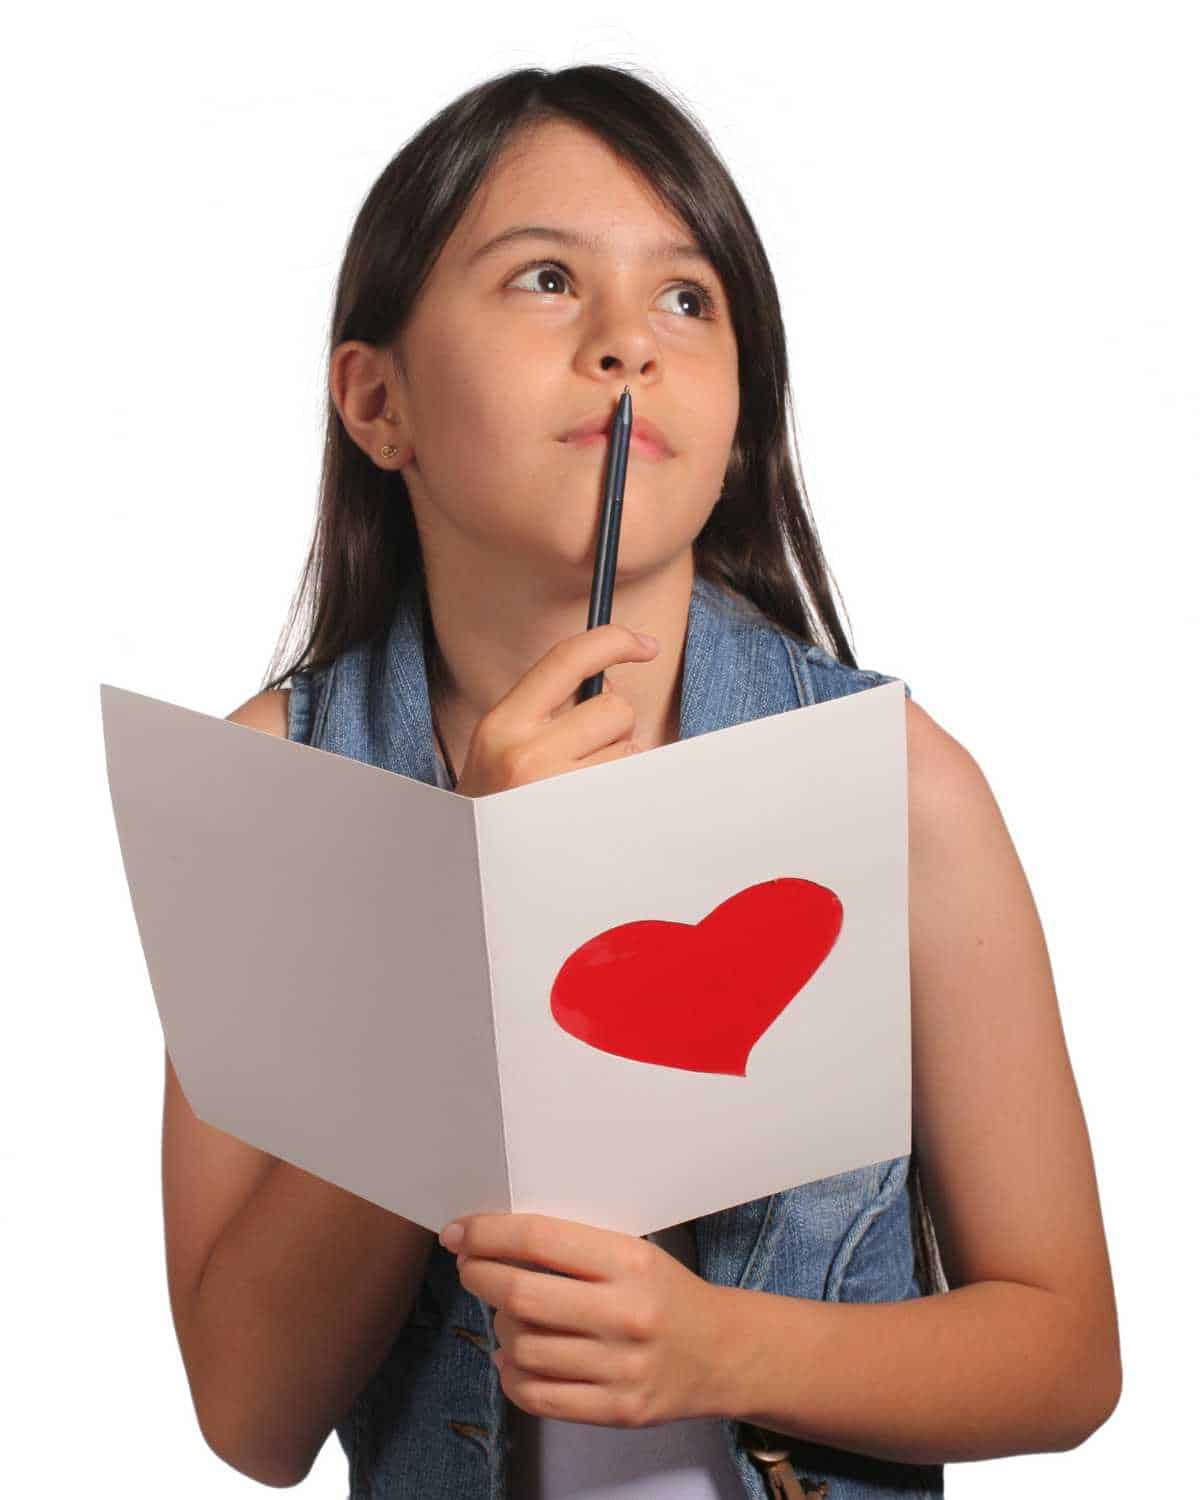 A girl holding a paper with a heart on it.